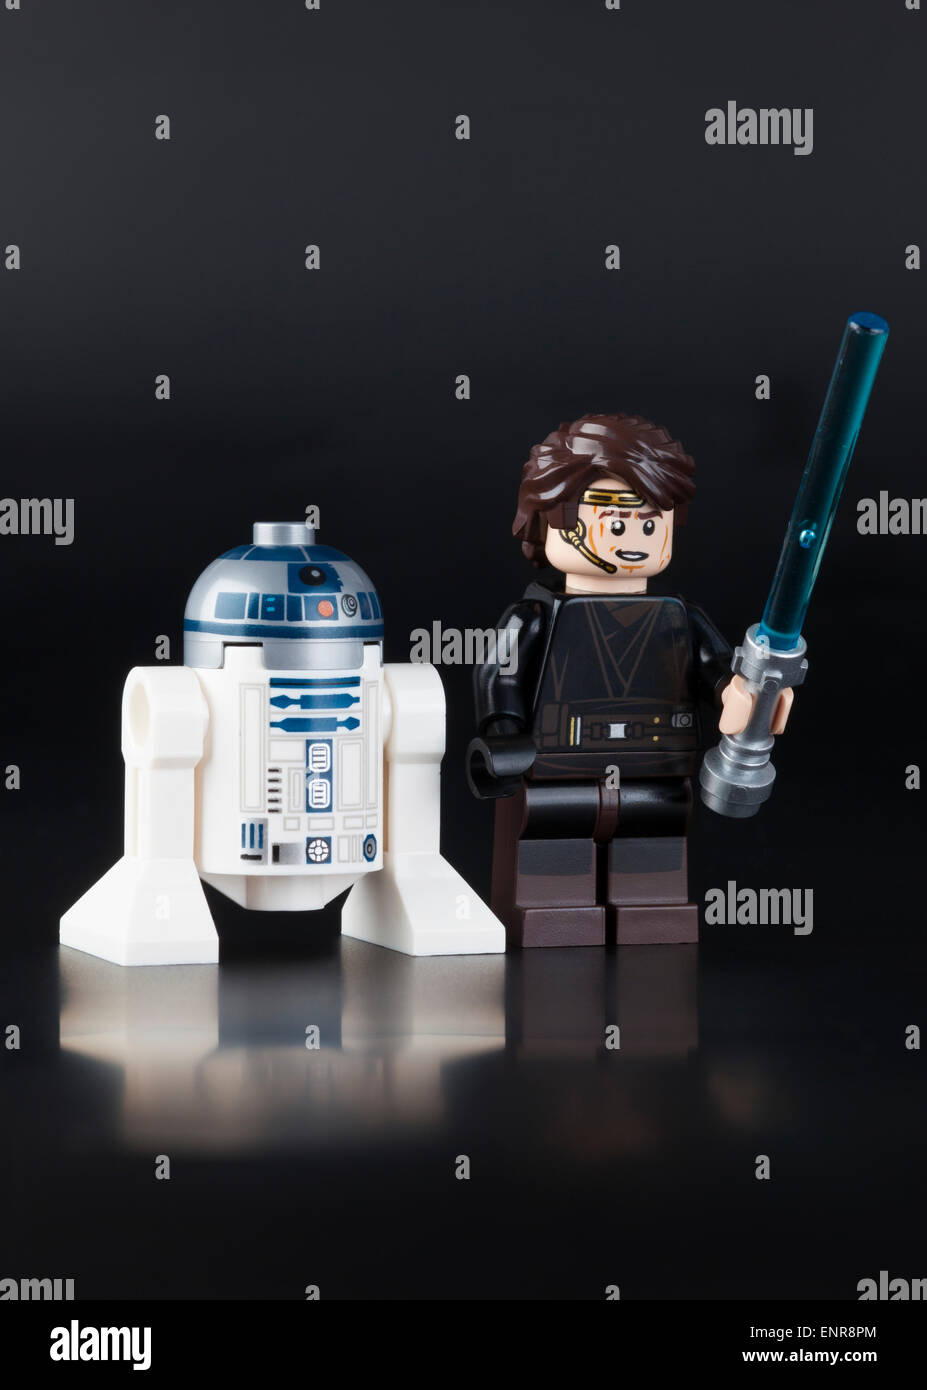 Tambov, Russian Federation - June 21, 2014 LEGO Star wars R2-D2 and LEGO Anakin Skywalker minifigures on black background. Stock Photo